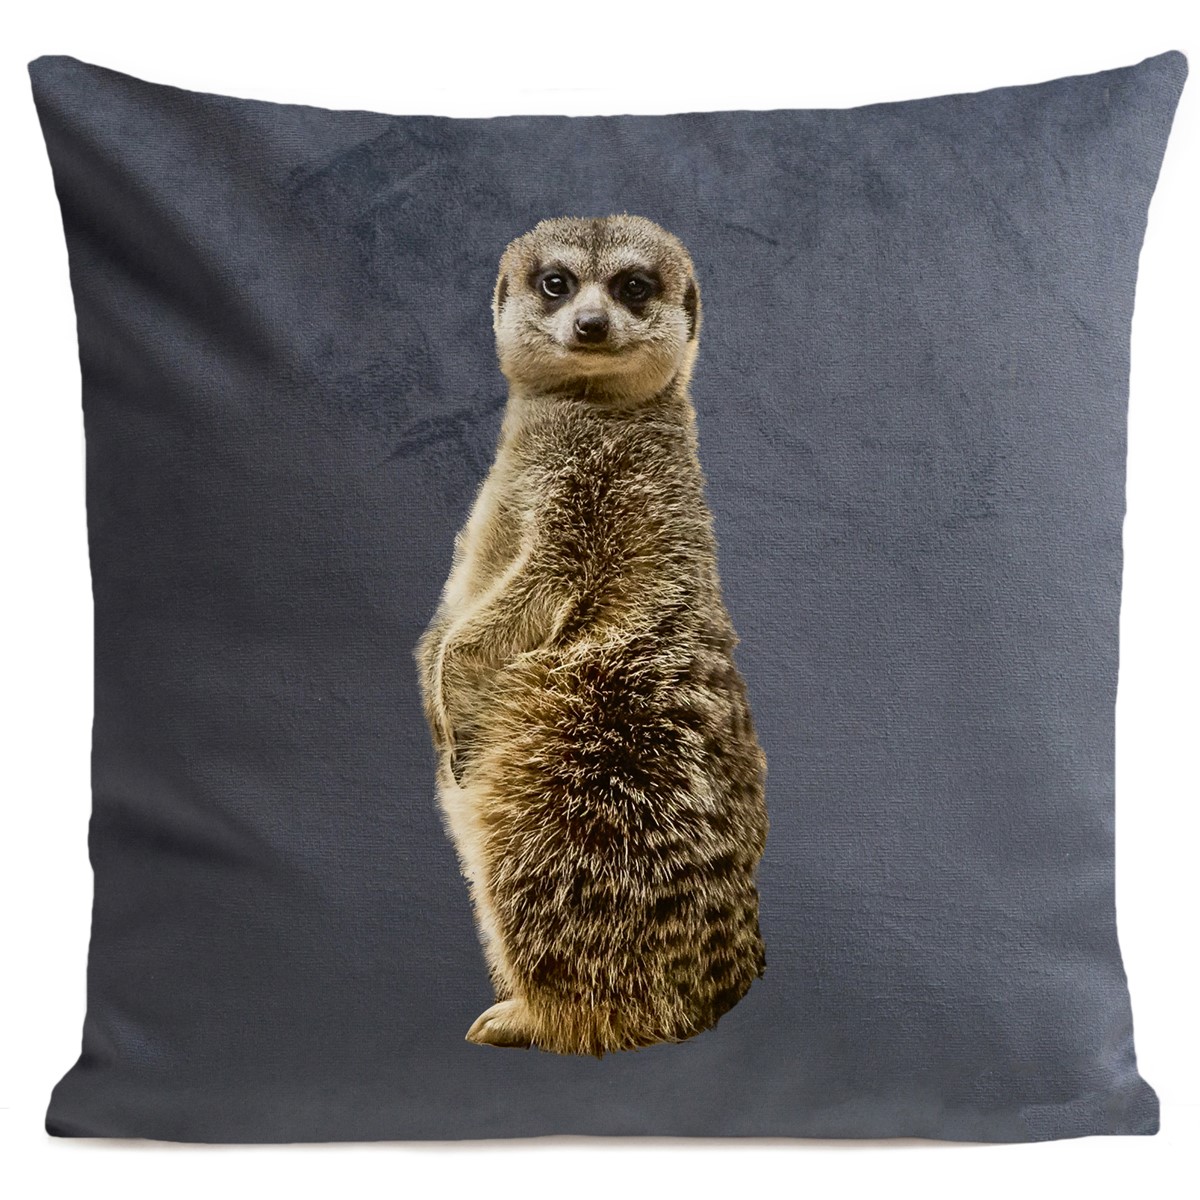 Coussin Suricate